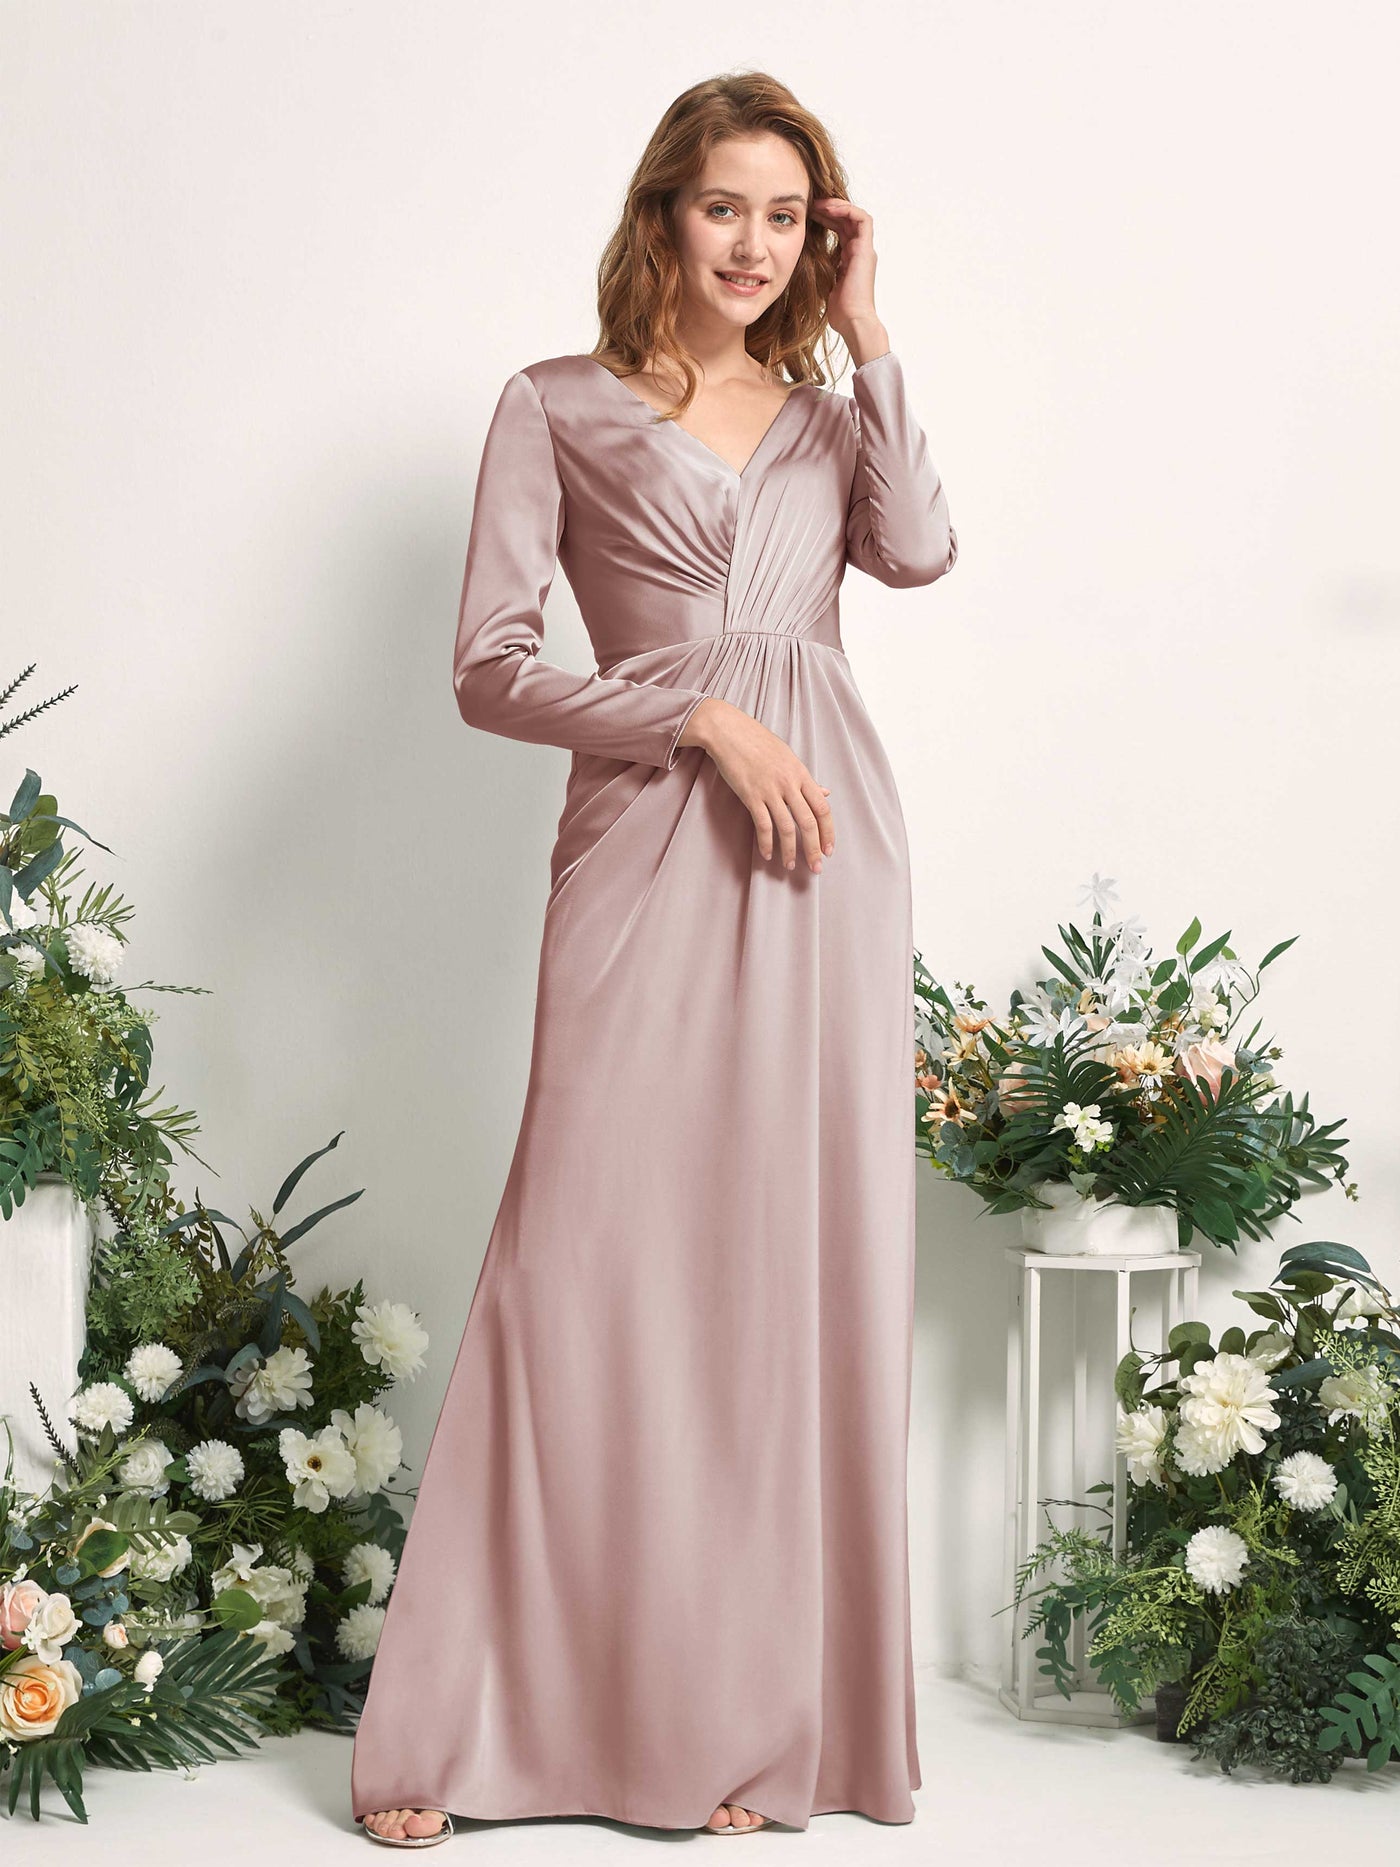 Dusty Rose Bridesmaid Dresses Bridesmaid Dress A-line Satin V-neck Full Length Long Sleeves Wedding Party Dress (80225854)#color_dusty-rose